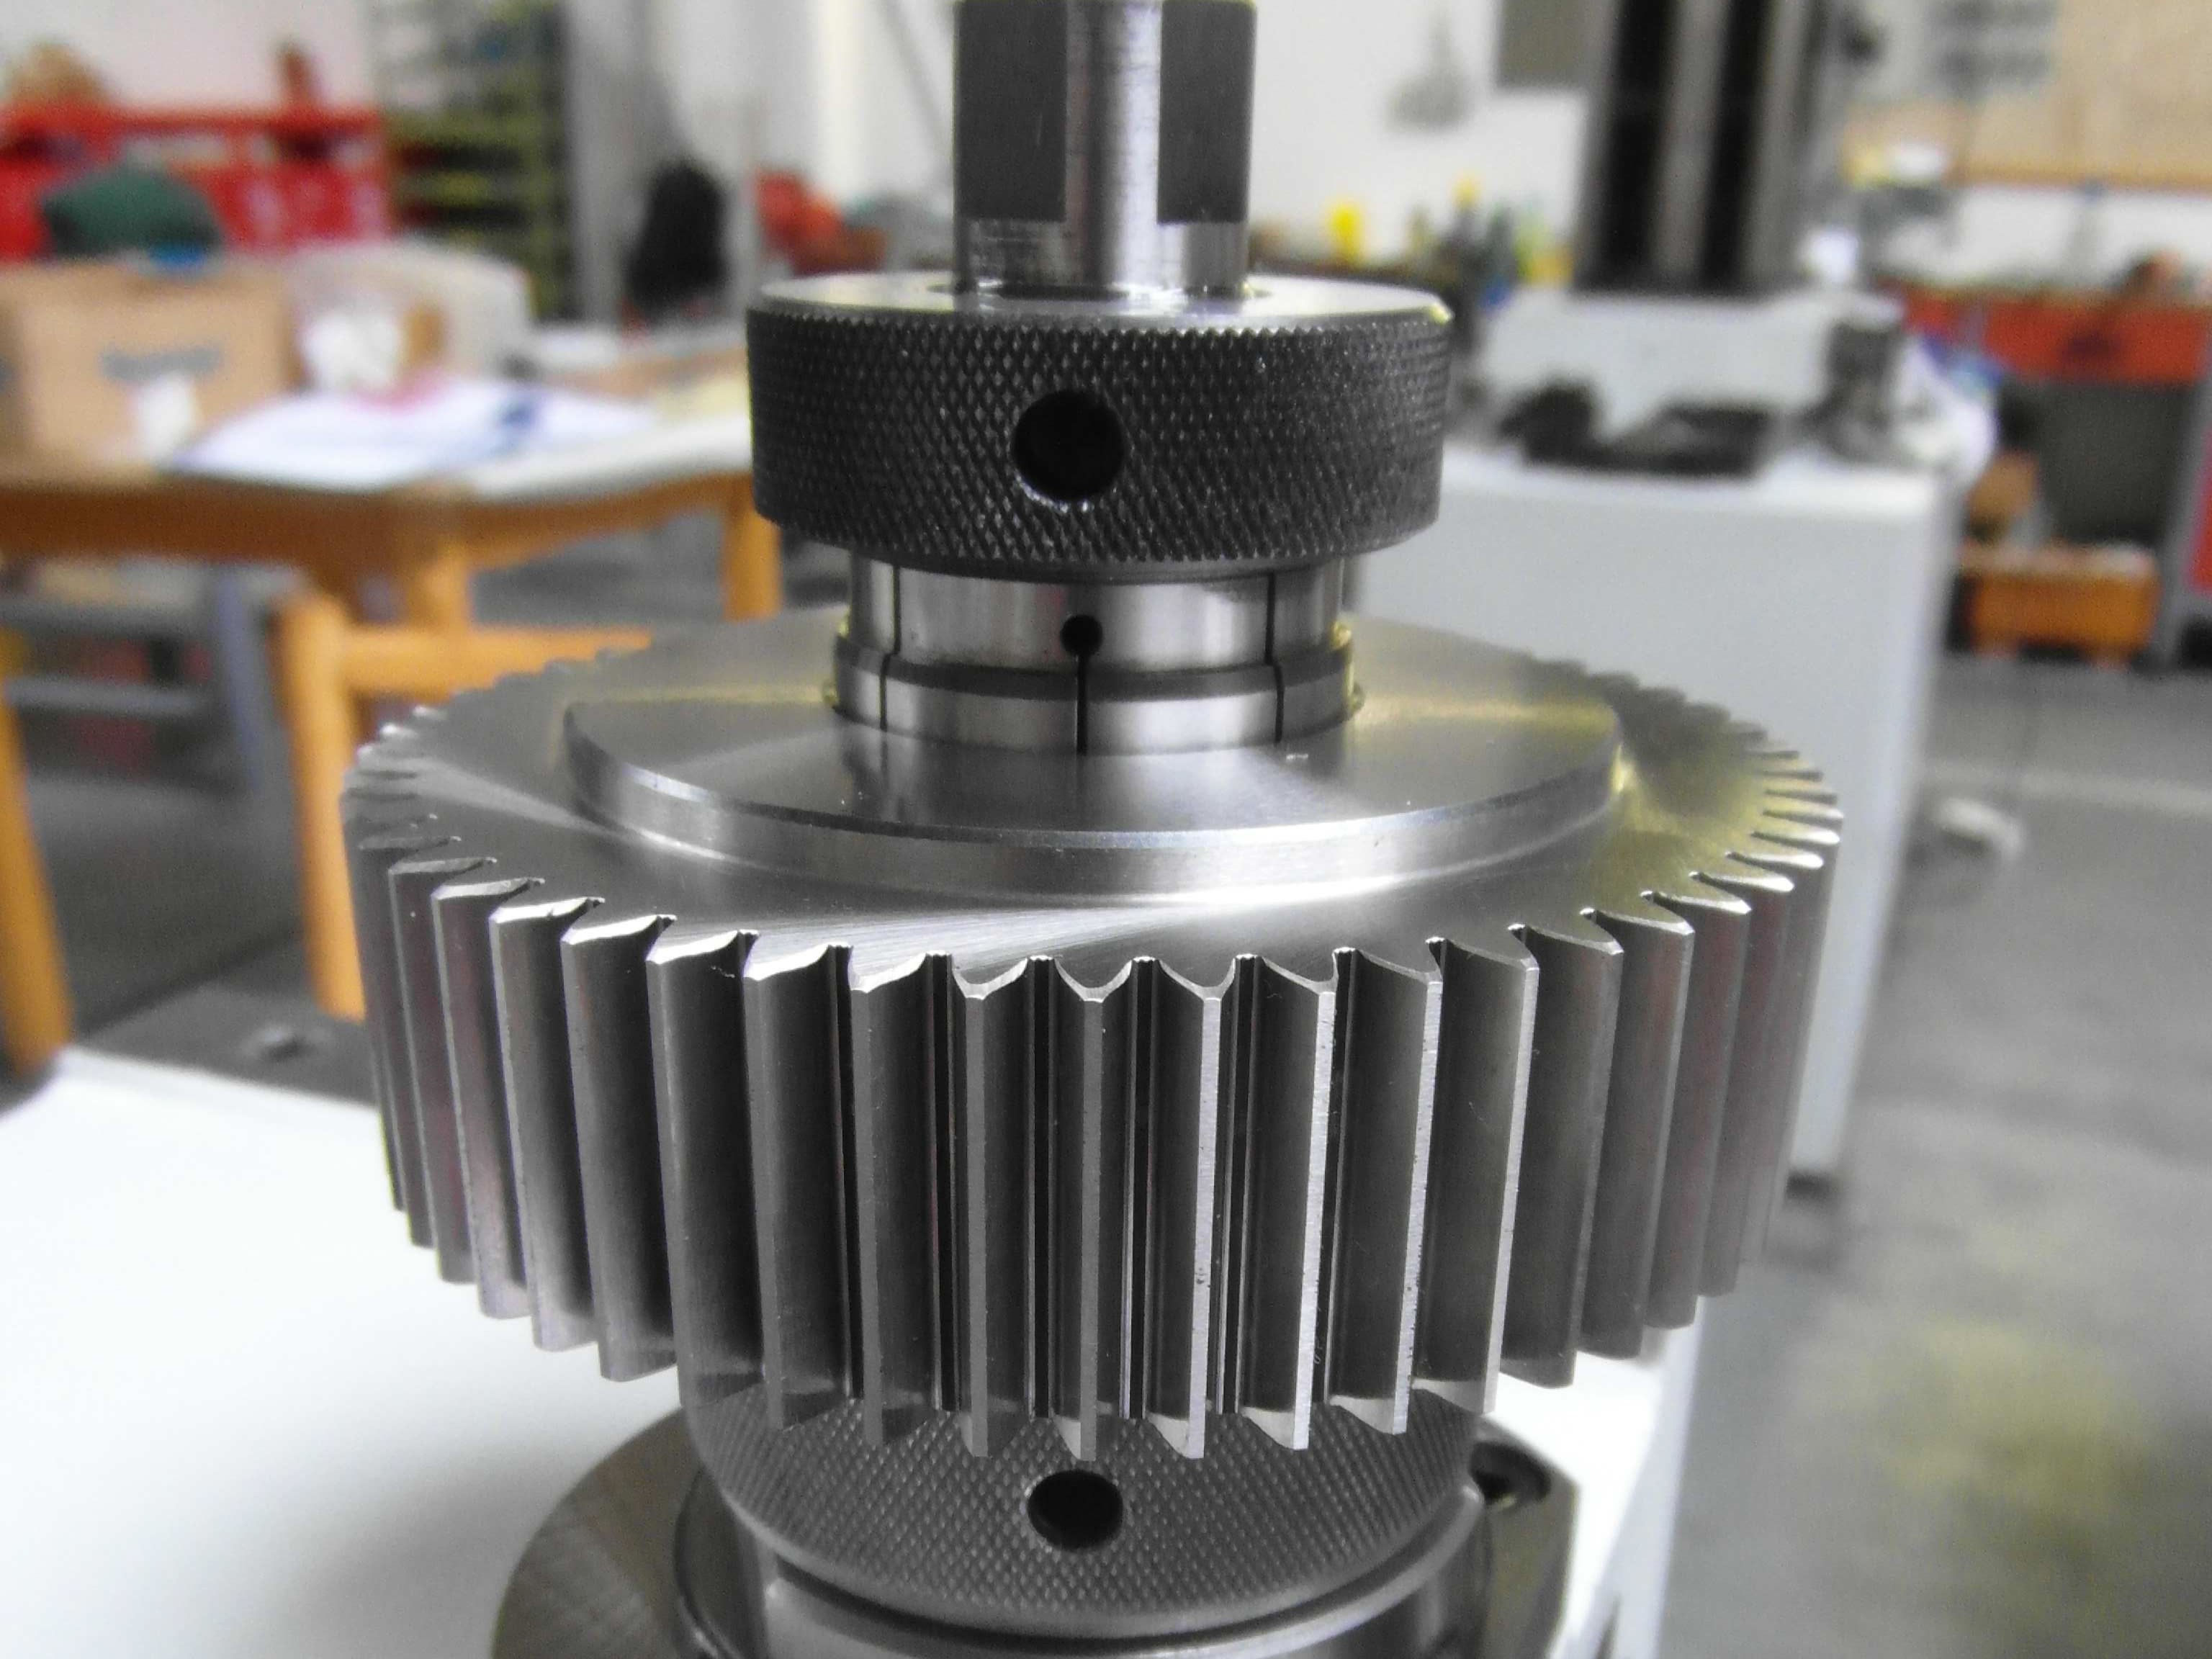 Spur / helical gears